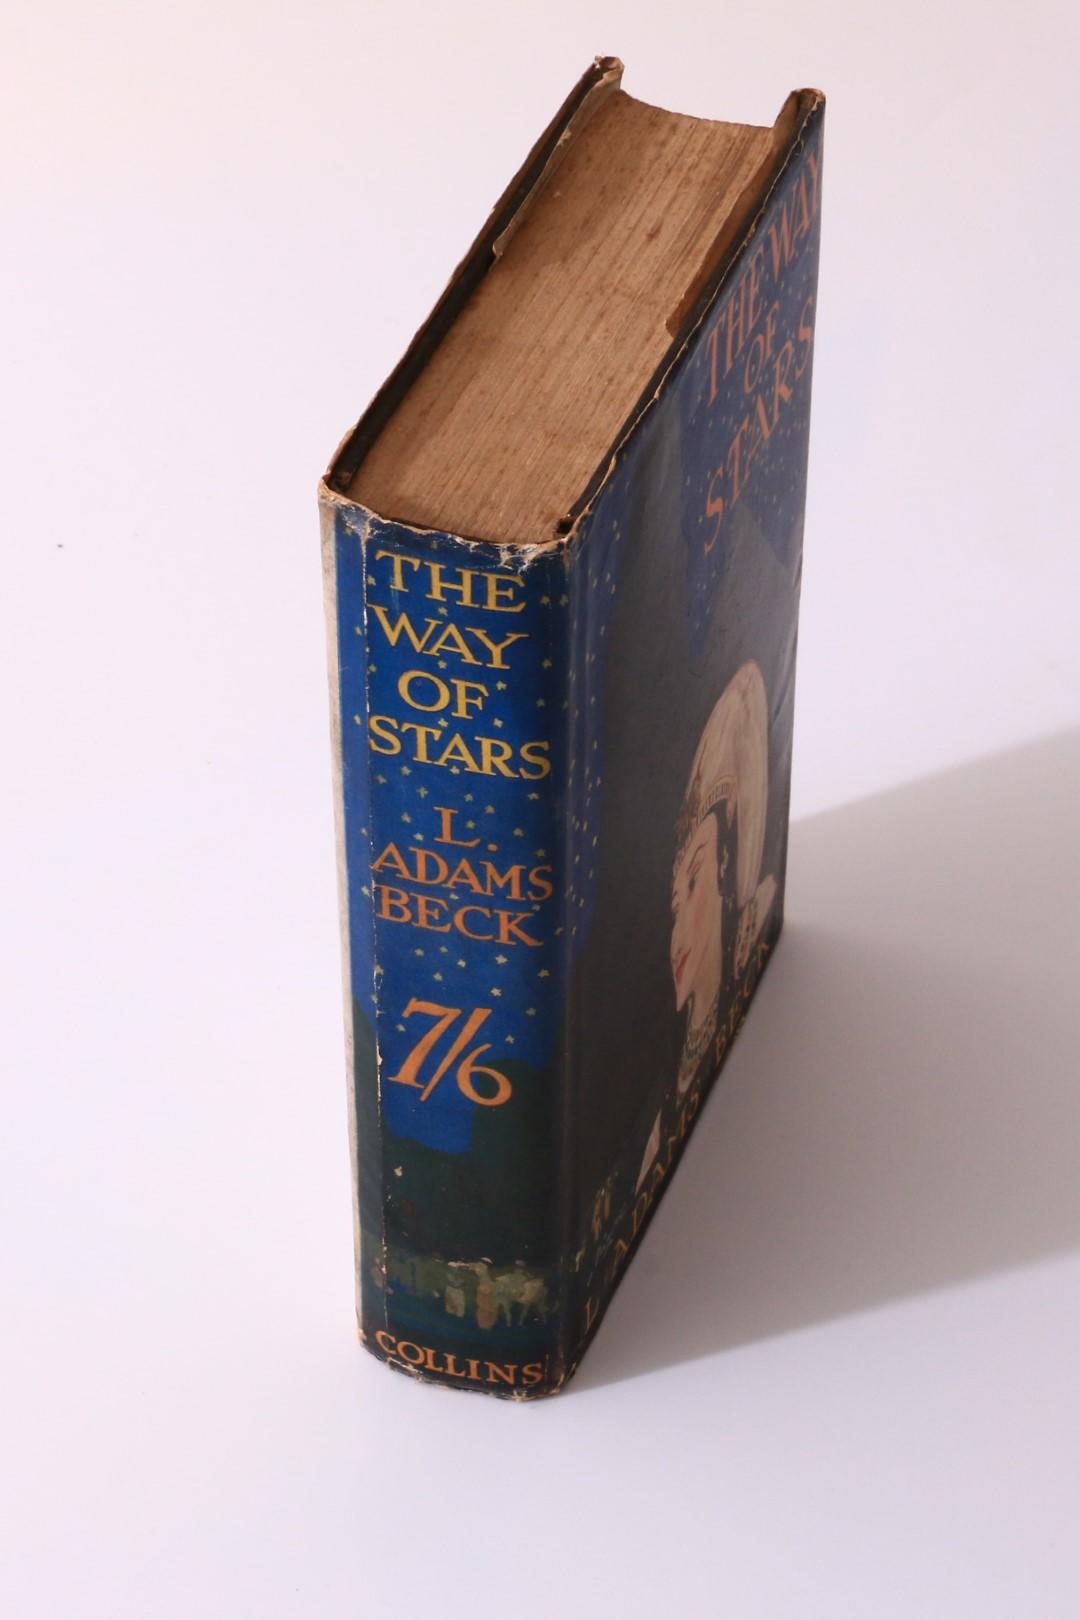 L. Adams Beck - The Way of Stars - Collins, 1925, First Edition.